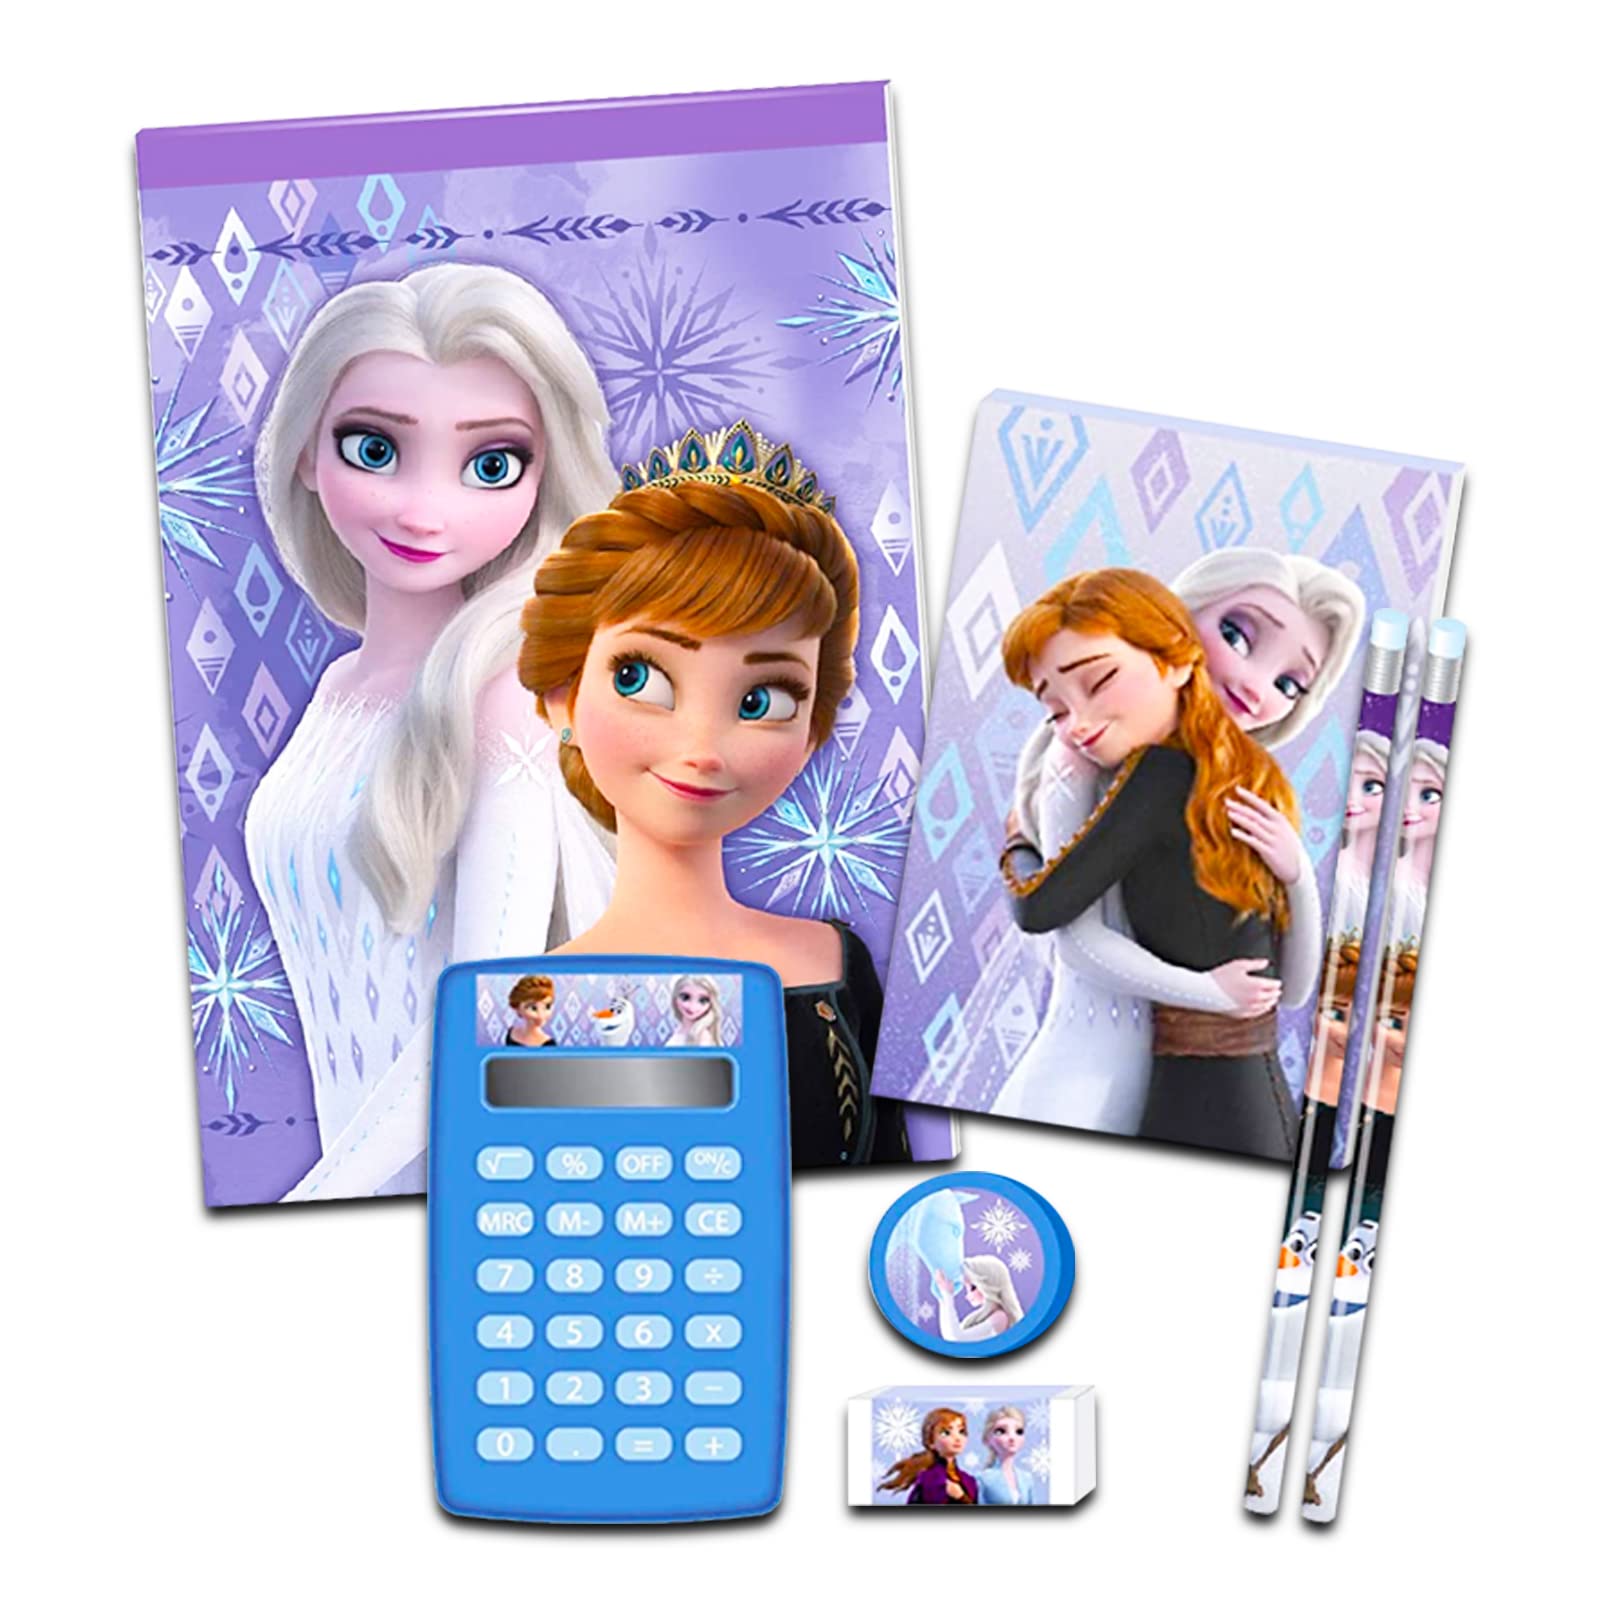 Disney Frozen Backpack with Lunch Box Set - Bundle with Backpack, Lunch Bag, Water Bottle, School Supplies, More for Girls